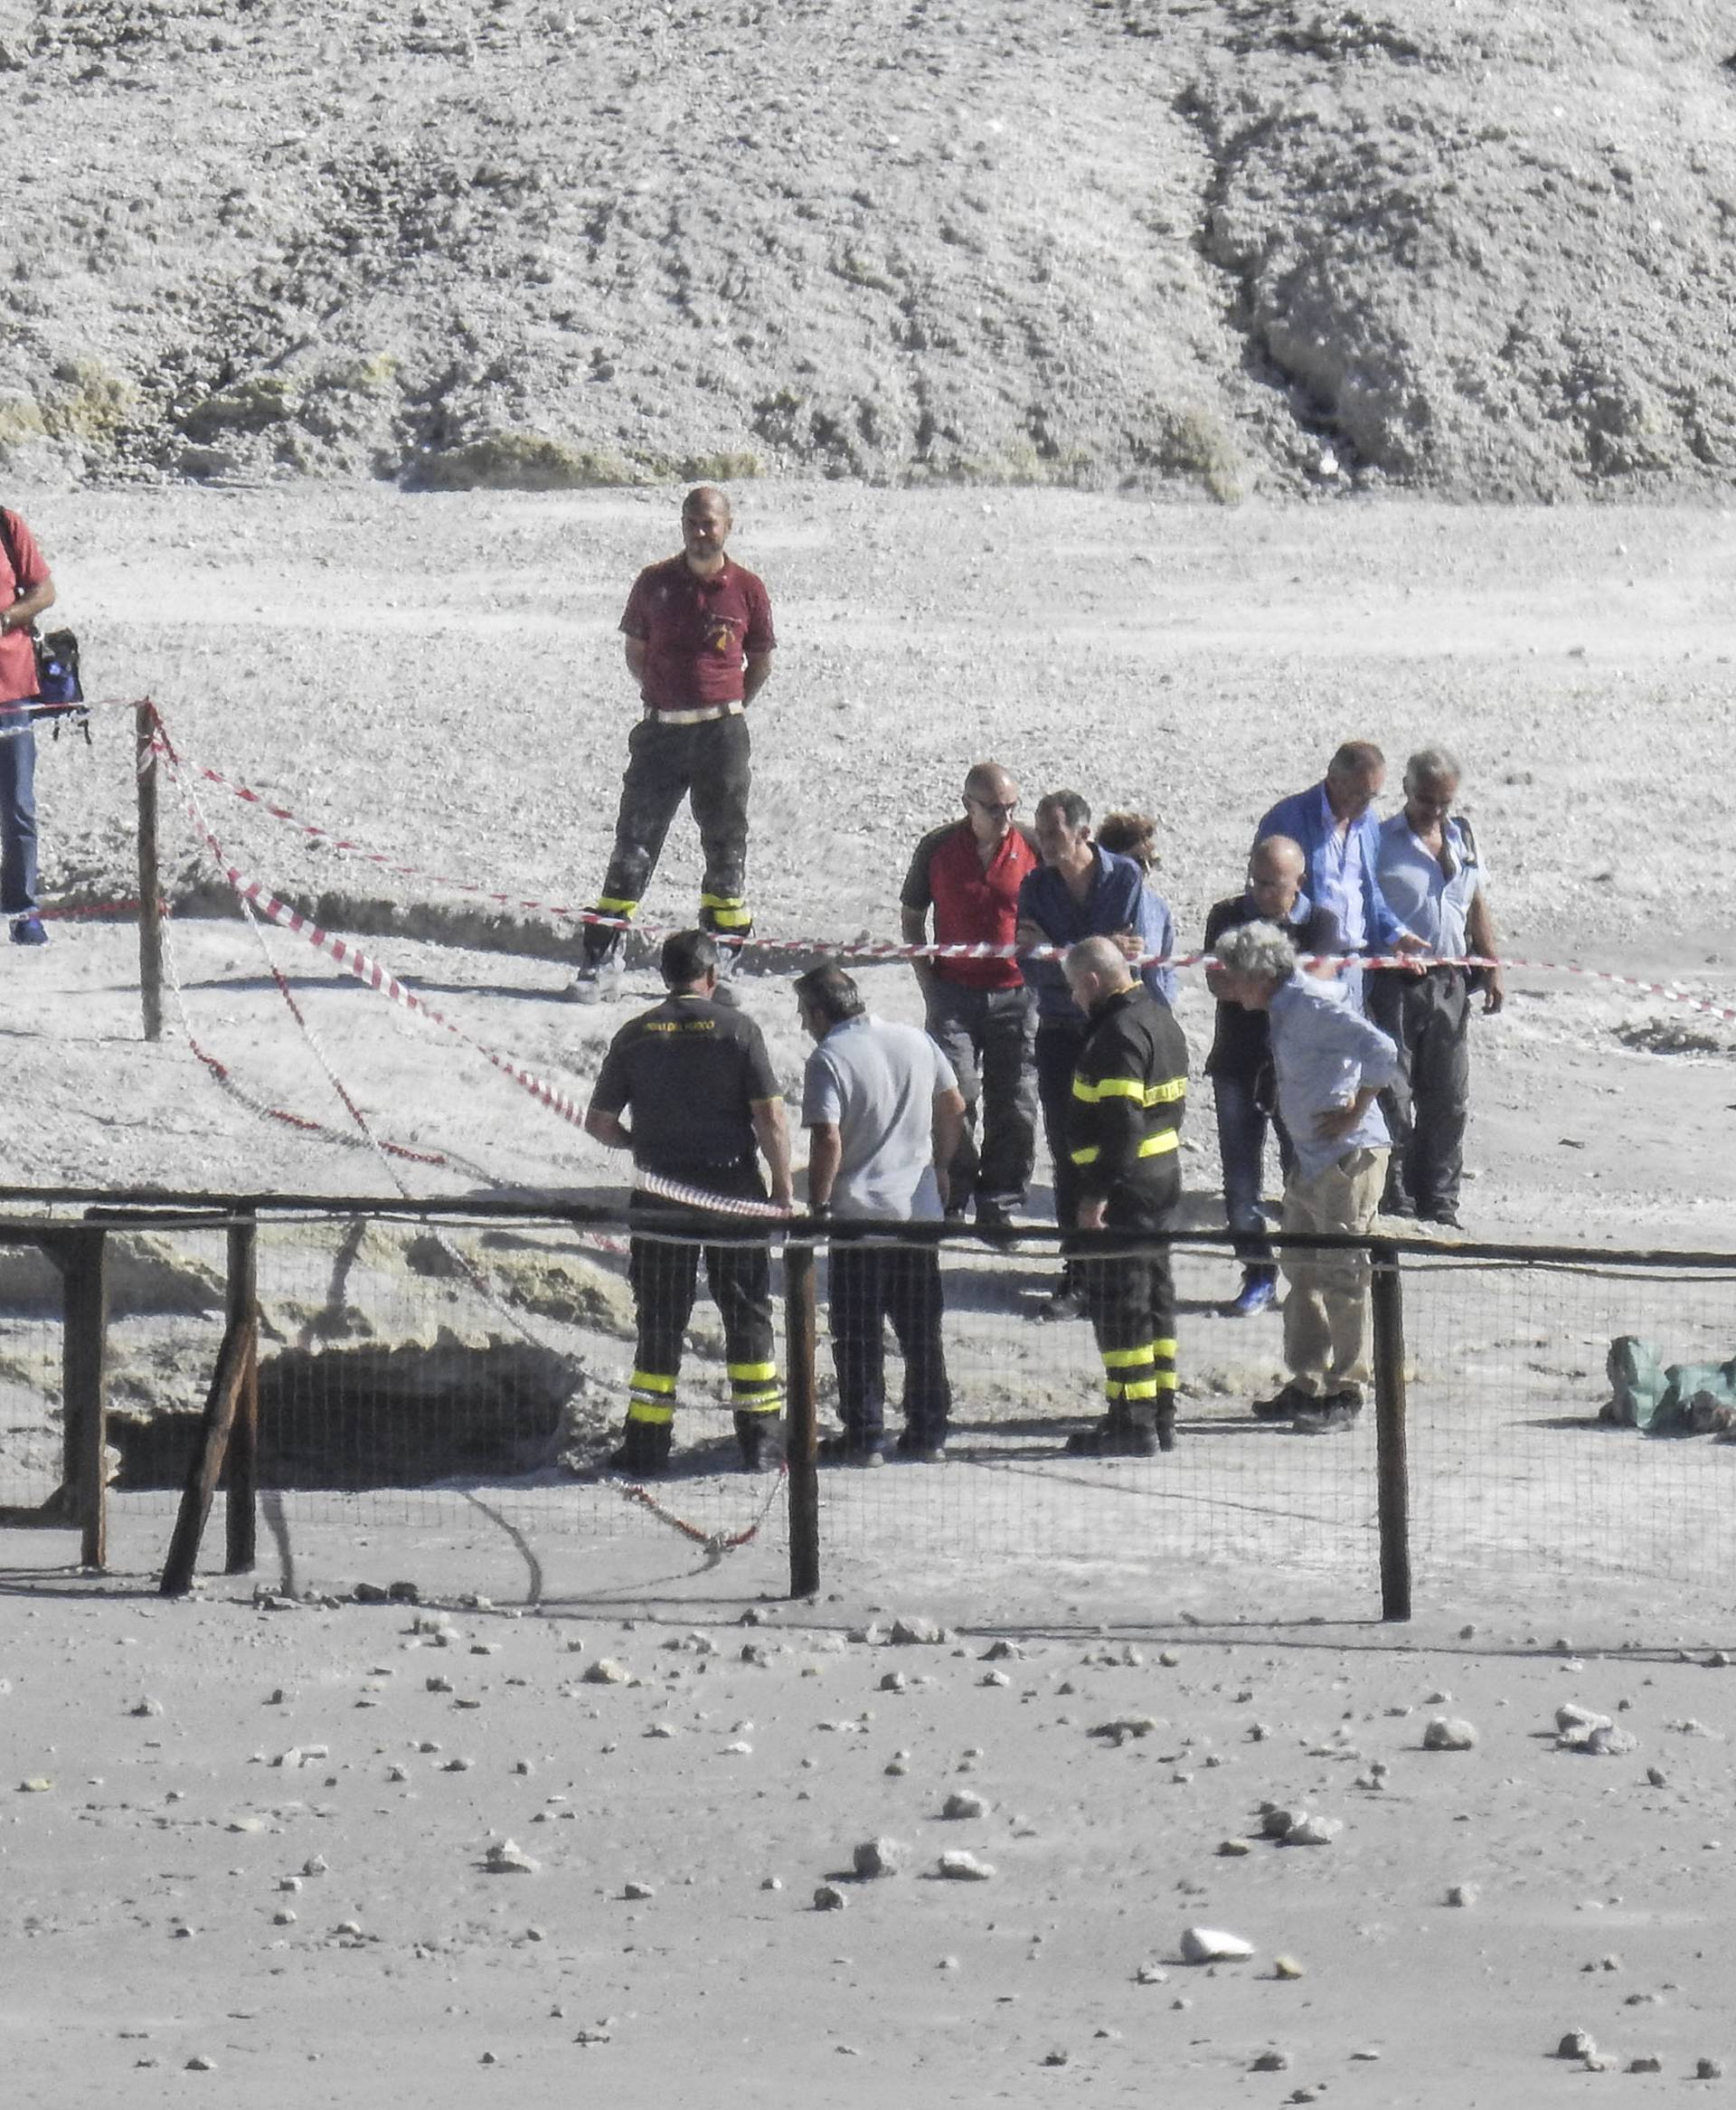 Three Venice tourists died swallowed by a crater that suddenly opened under their feet in the Solfatara of Pozzuoli.